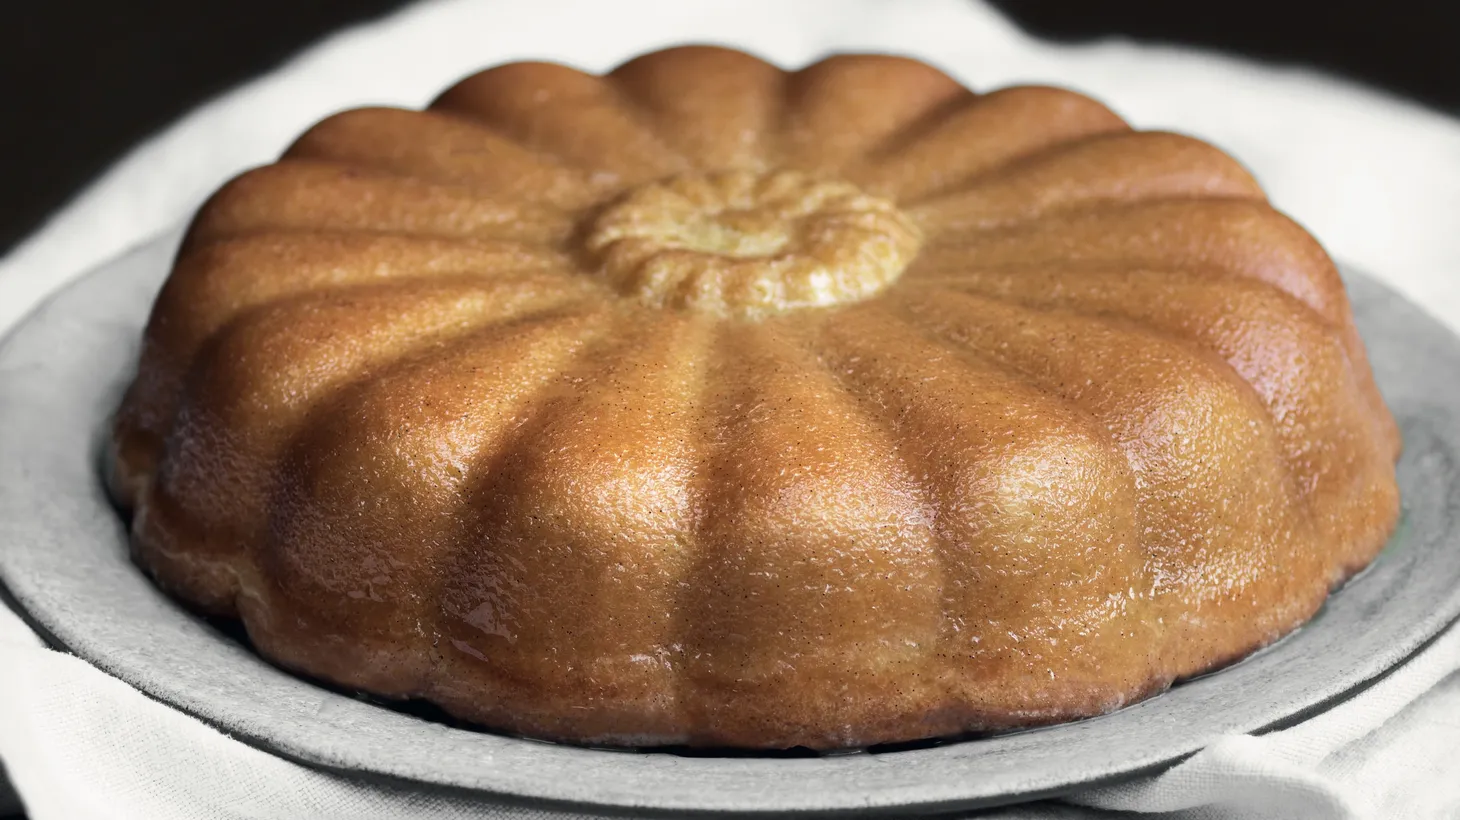 "This cake is a Nancy cake," reads the headnote for the Kentucky Butter Cake in Nancy Silverton's latest cookbook.